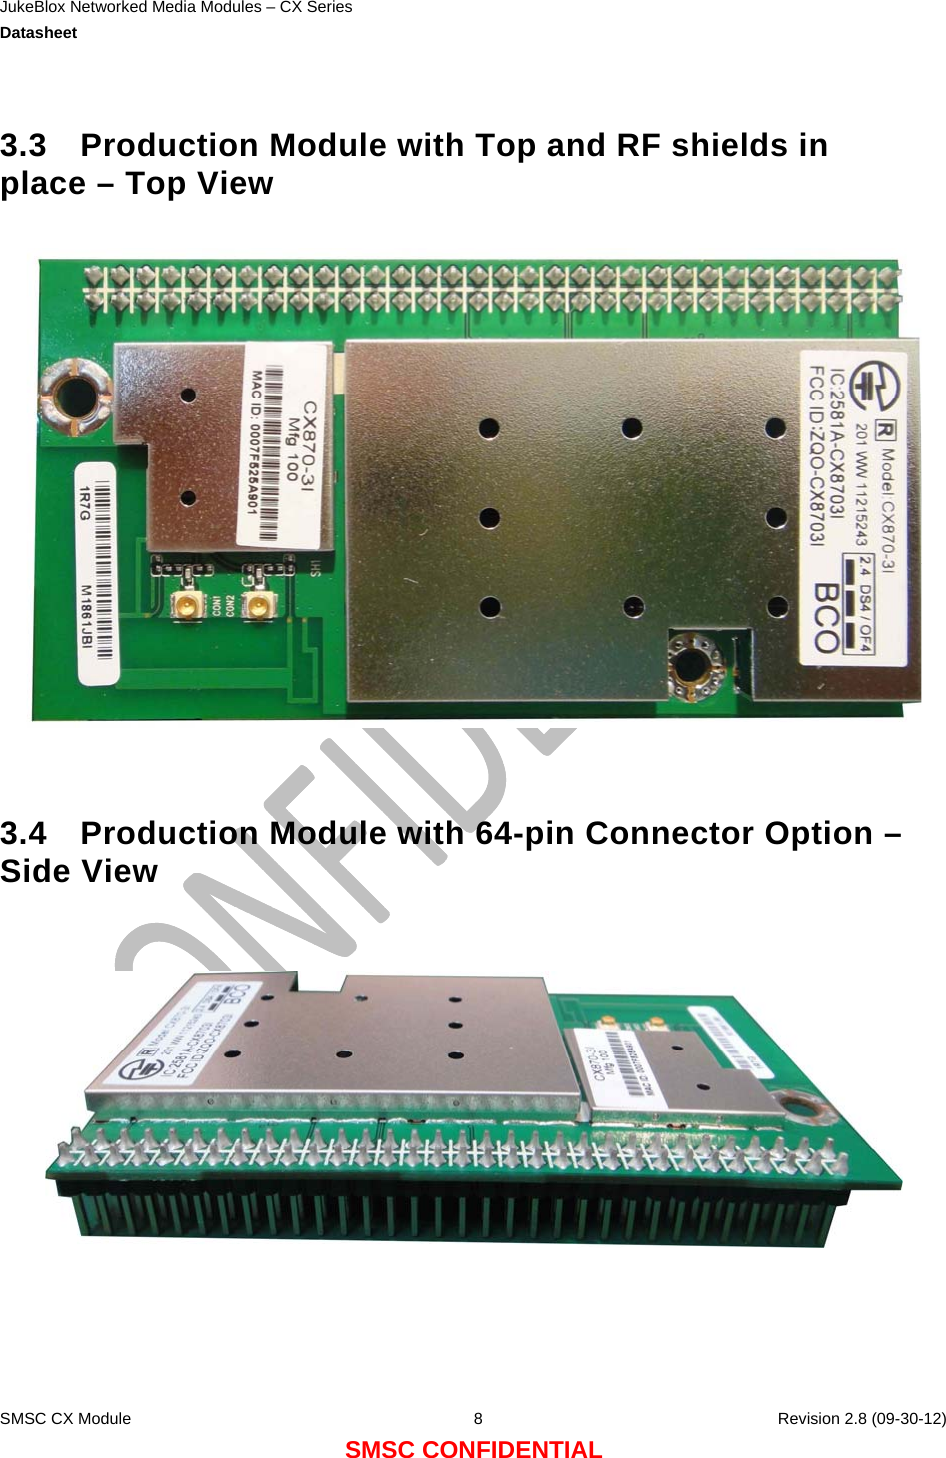 JukeBlox Networked Media Modules – CX Series  Datasheet    SMSC CX Module  8    Revision 2.8 (09-30-12) SMSC CONFIDENTIAL  3.3  Production Module with Top and RF shields in place – Top View     3.4  Production Module with 64-pin Connector Option – Side View   